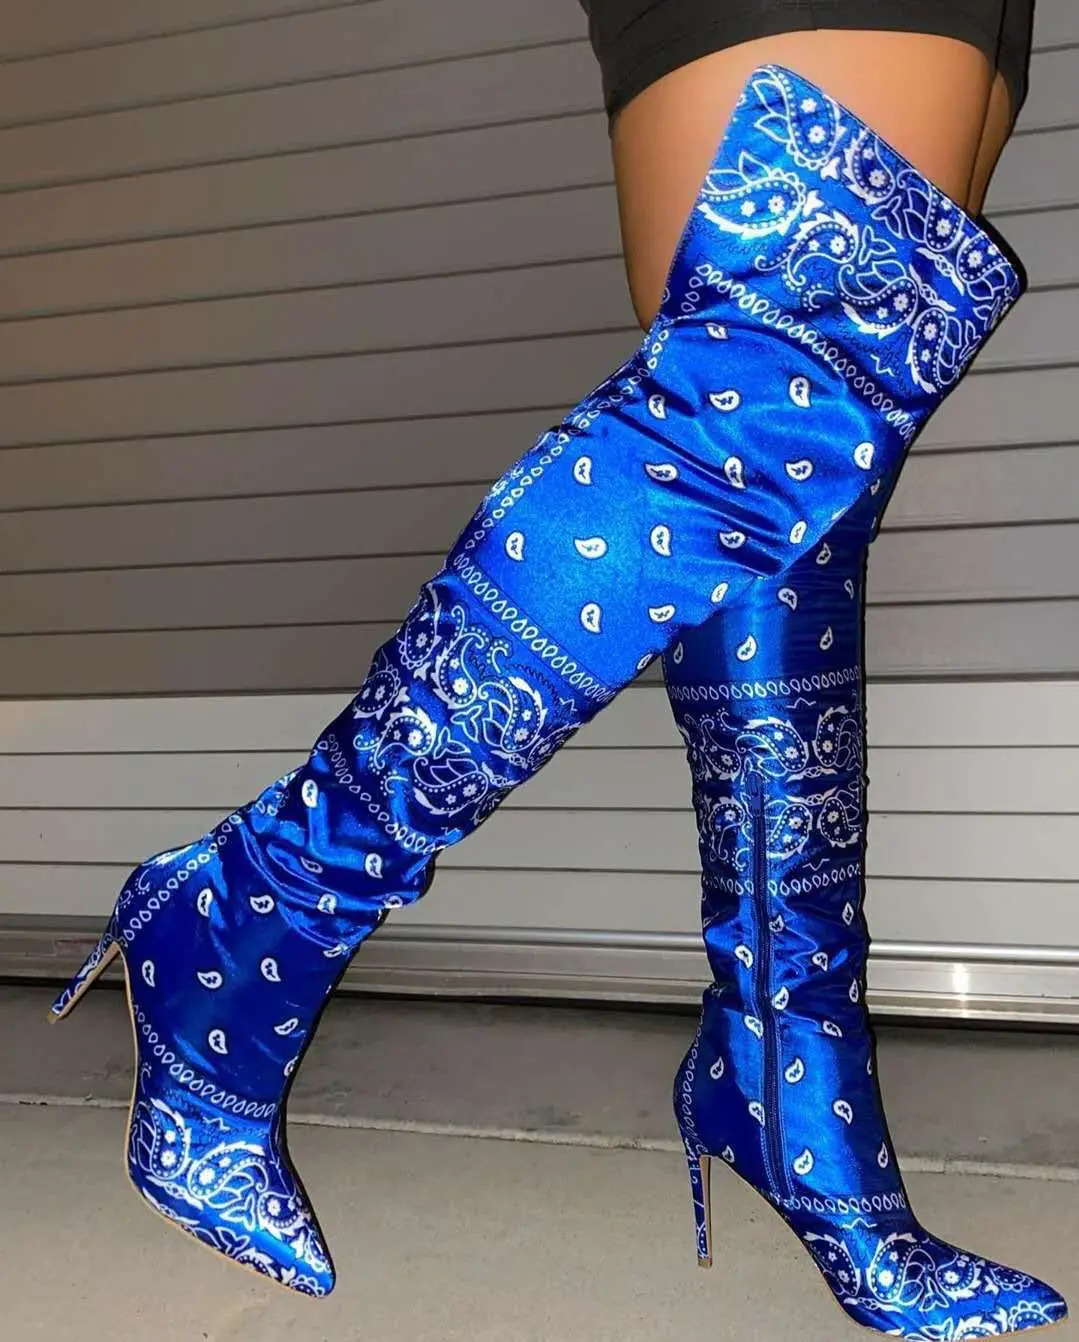 

DX-009 2020 fashion fall bohemia floral print polyester silk fabric high boots with Stiletto high heel for women pointed boots, Picture show